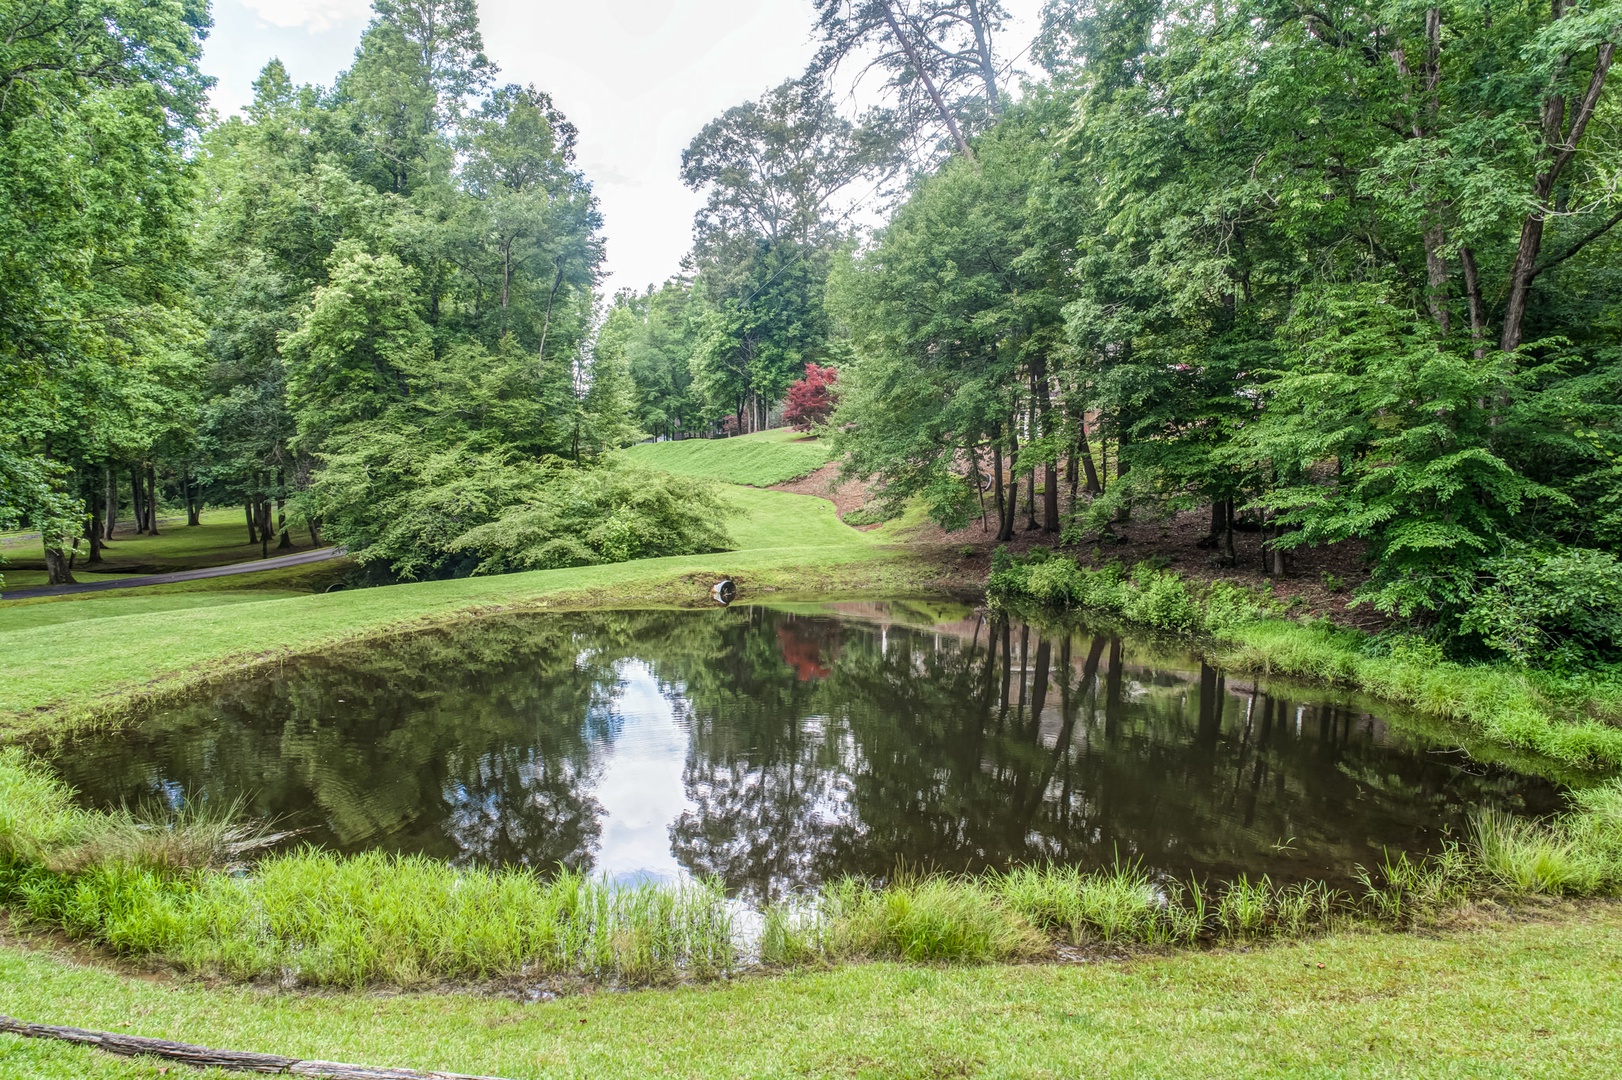 Take a stroll to the pond on the property & enjoy the tranquil nature views